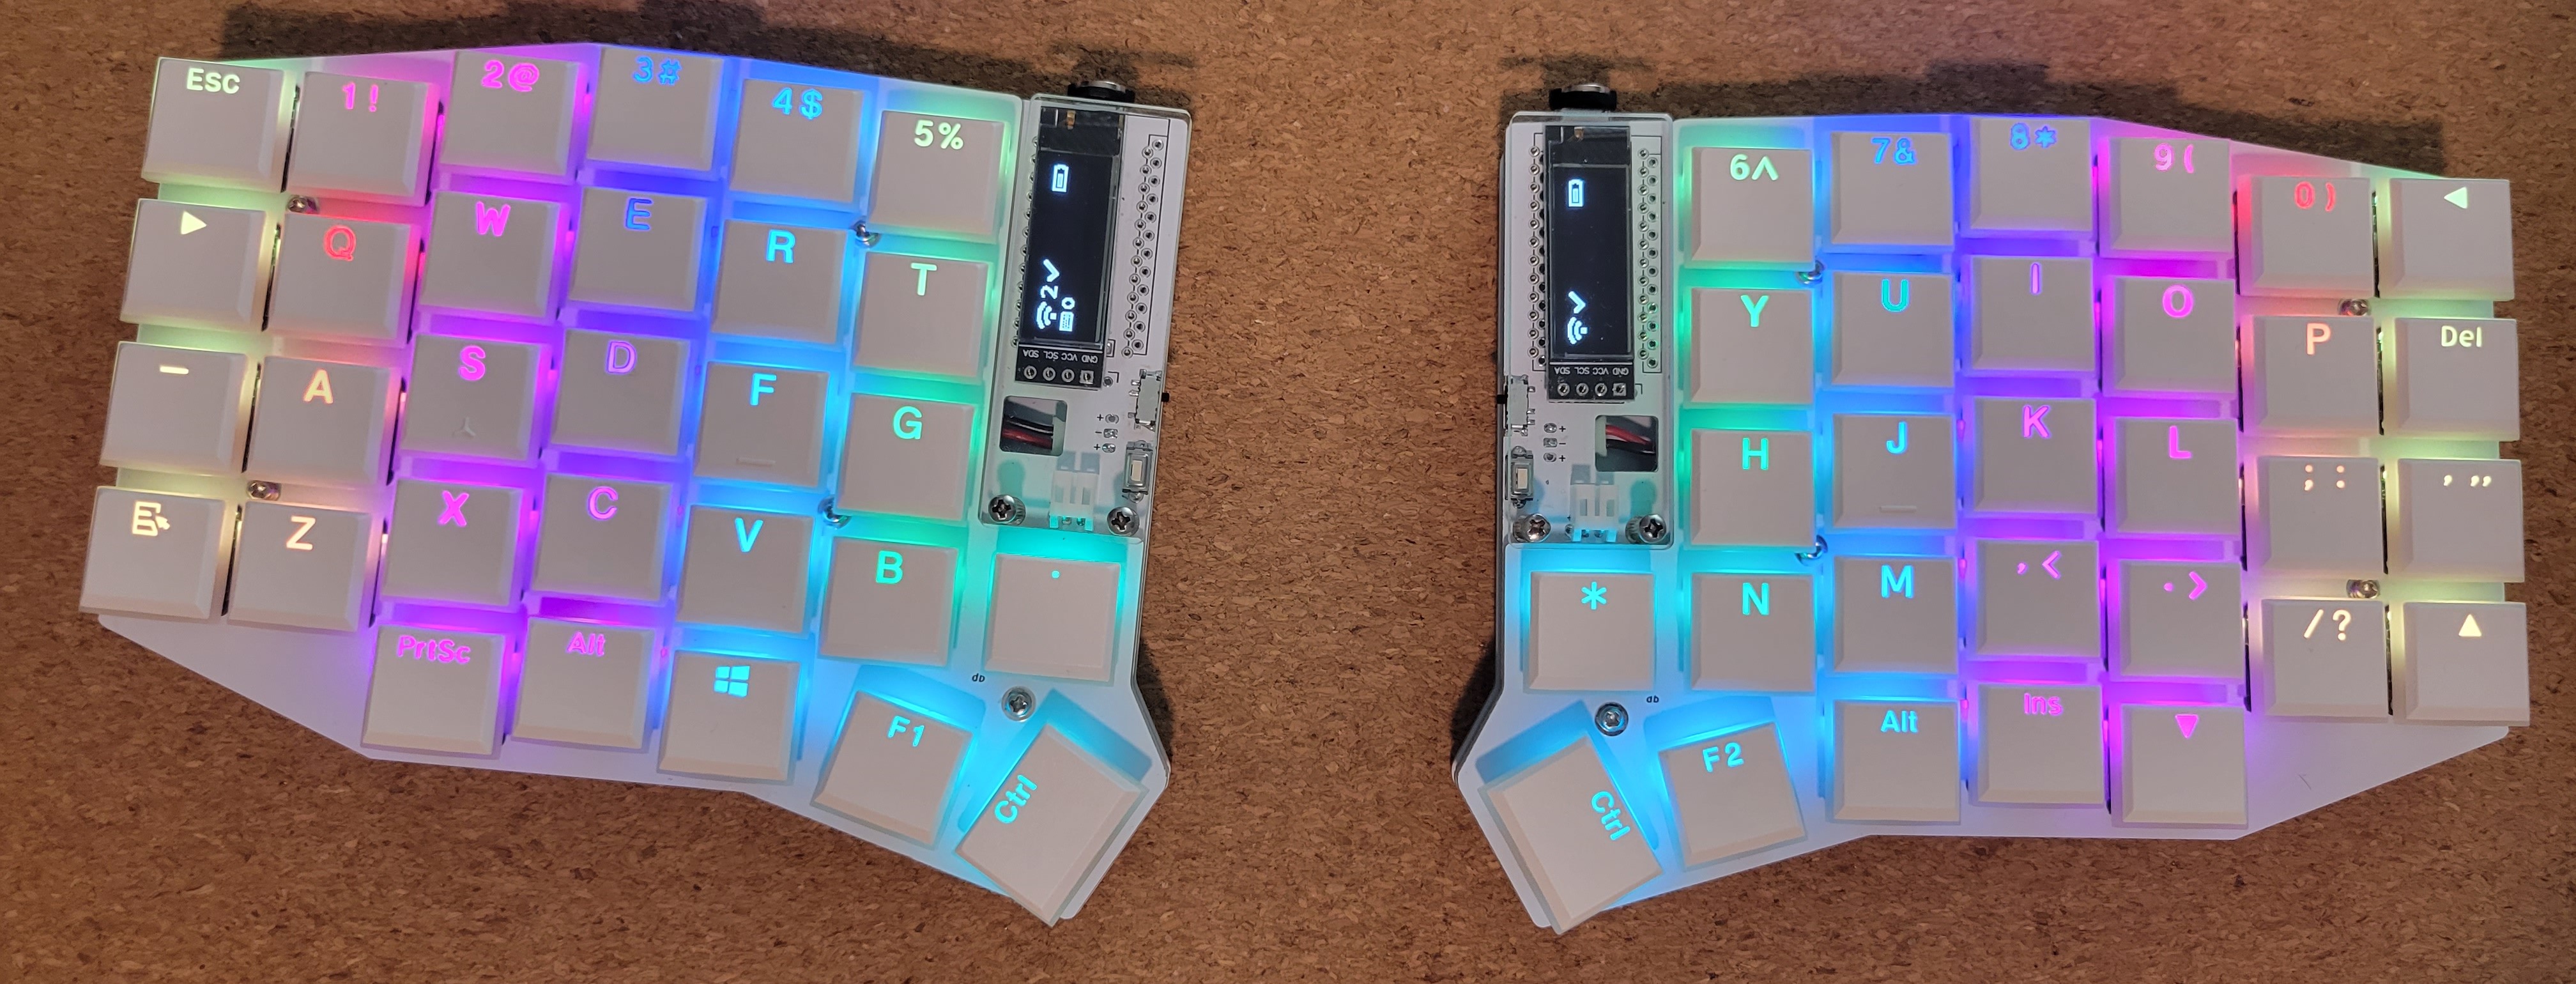 Sofle Choc Wireless Keyboard with no encoders and RGB LEDS